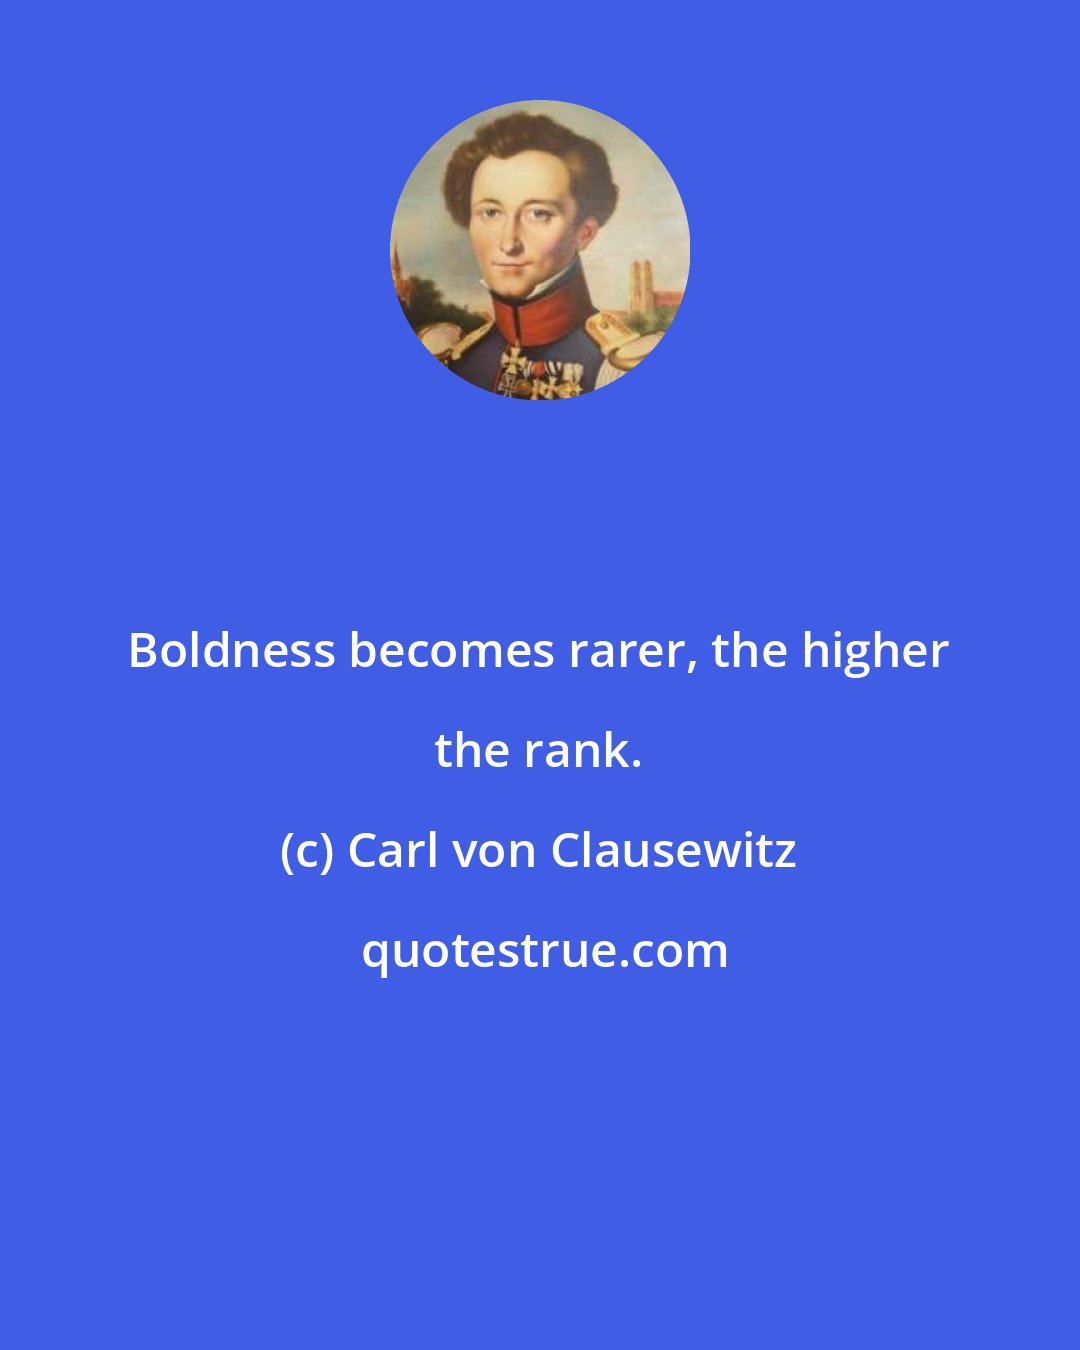 Carl von Clausewitz: Boldness becomes rarer, the higher the rank.